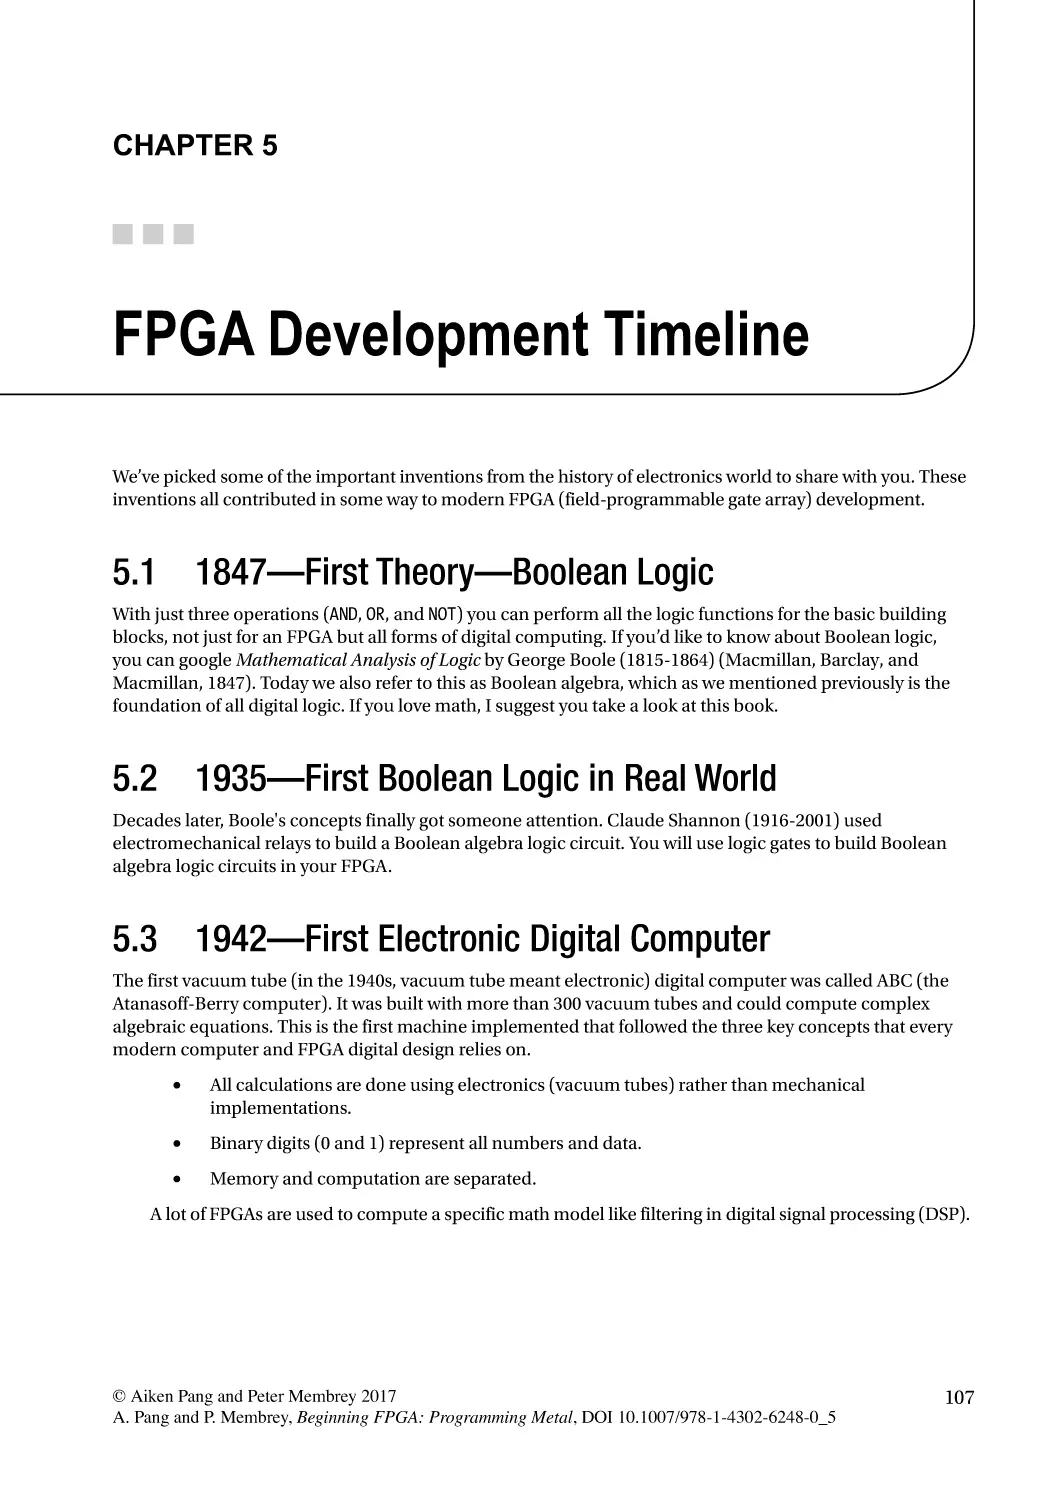 Chapter 5
5.1 1847—First Theory—Boolean Logic
5.2 1935—First Boolean Logic in Real World
5.3 1942—First Electronic Digital Computer